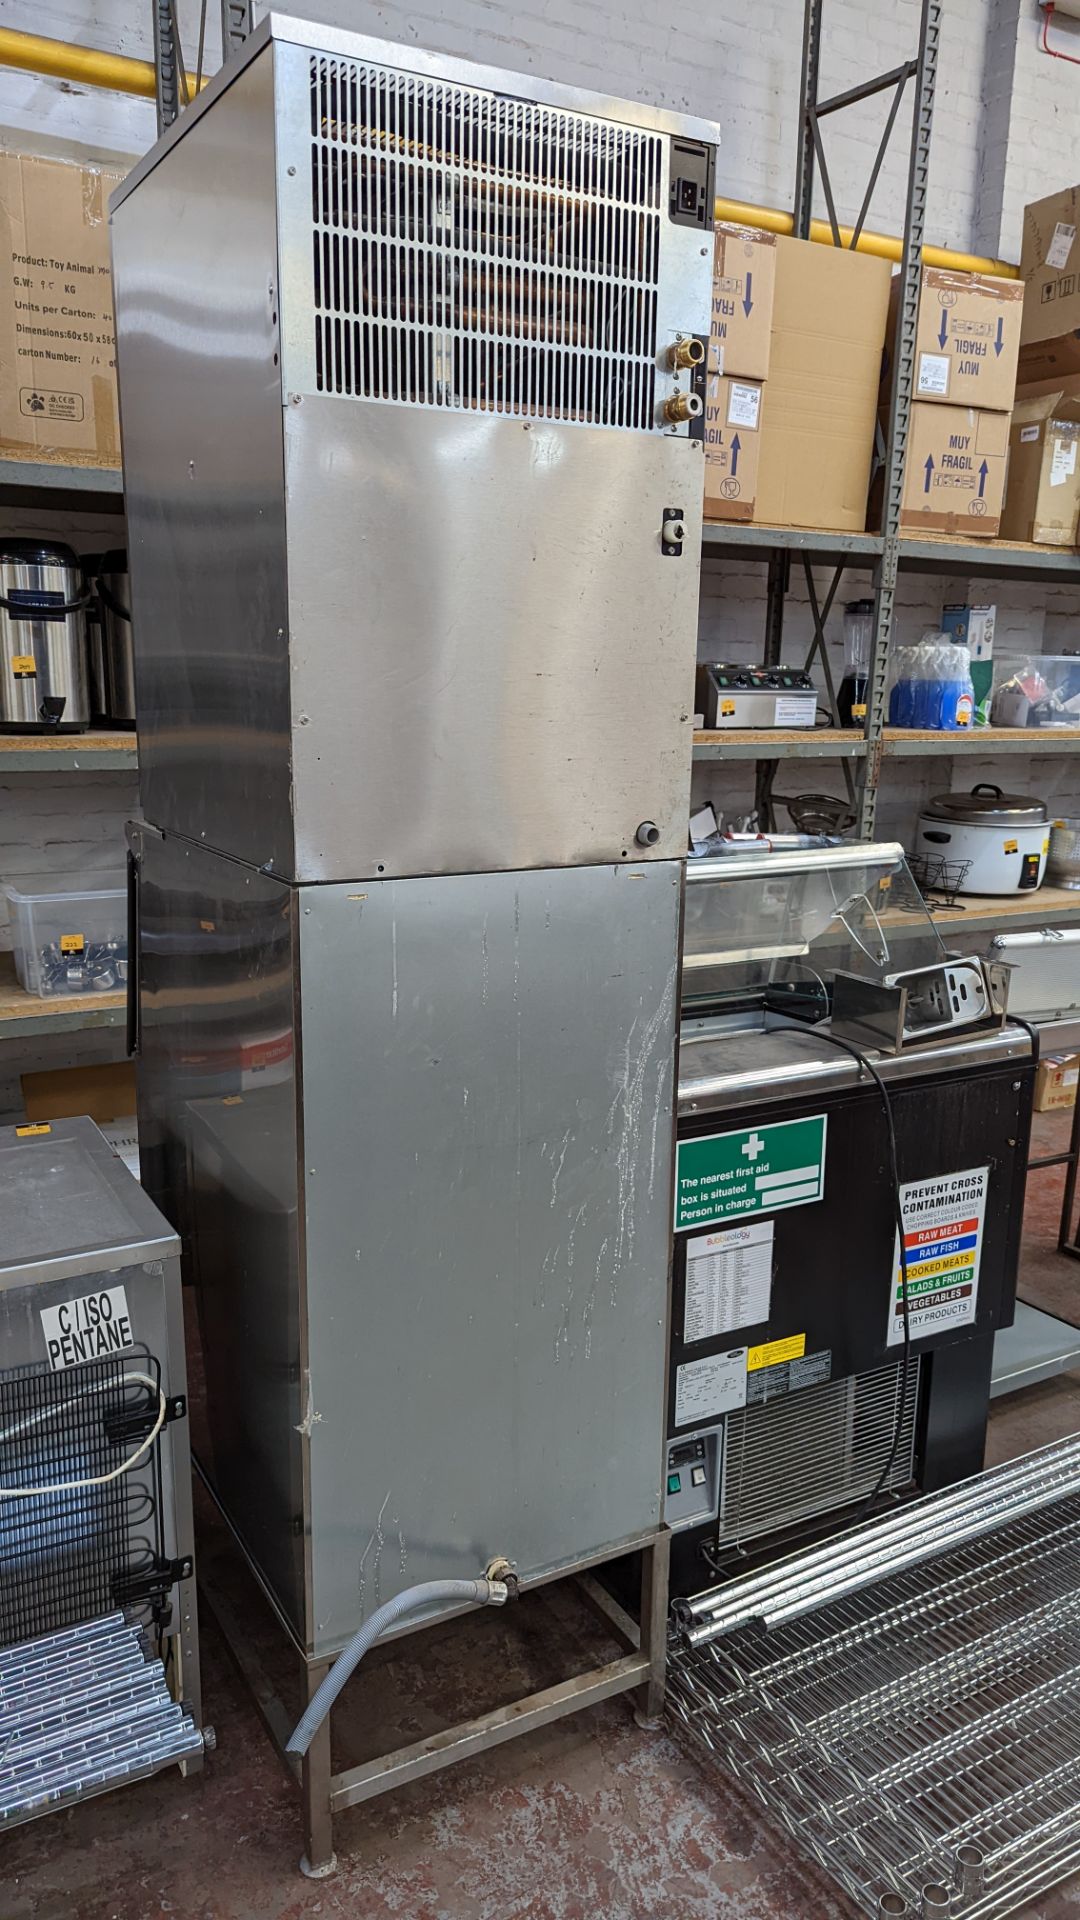 Hoshizaki commercial ice machine, model im-240 AWNE including stand & water filtration - Image 8 of 13